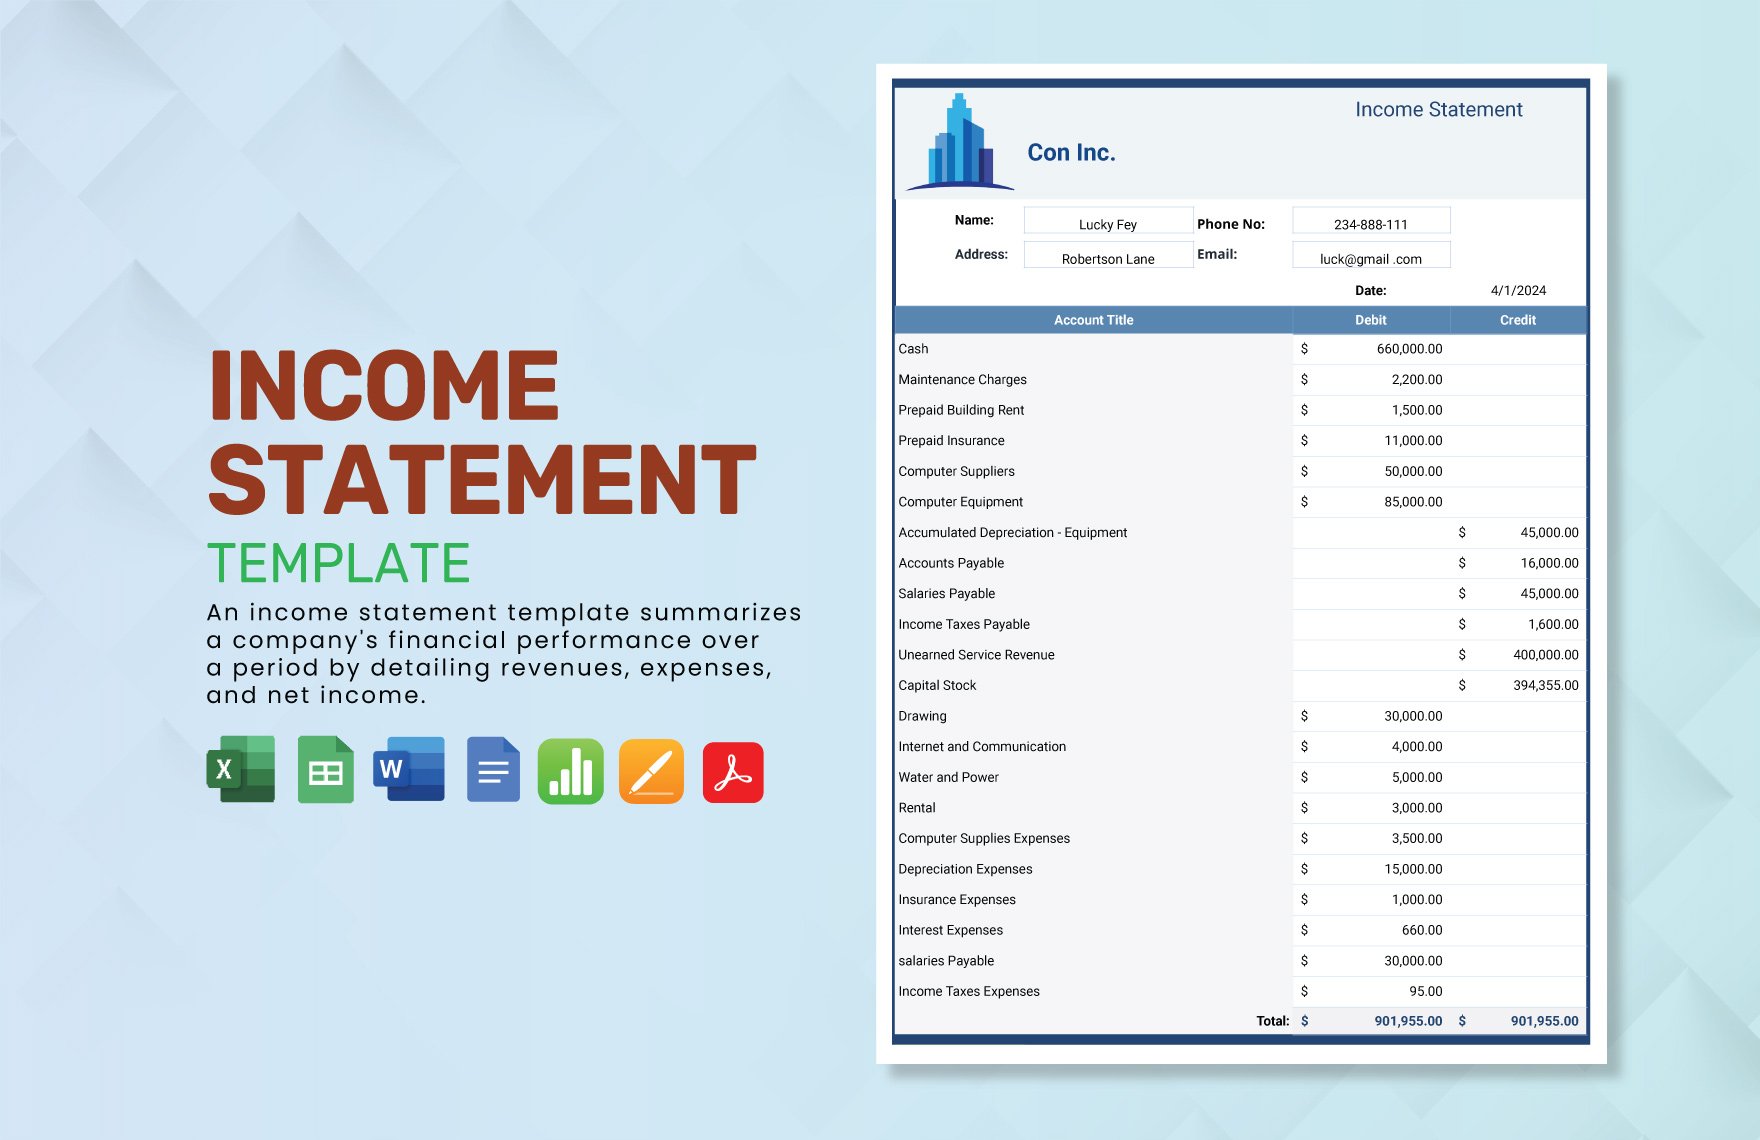 Income Statement Template in Word, Google Docs, Excel, PDF, Google Sheets, Apple Pages, Apple Numbers